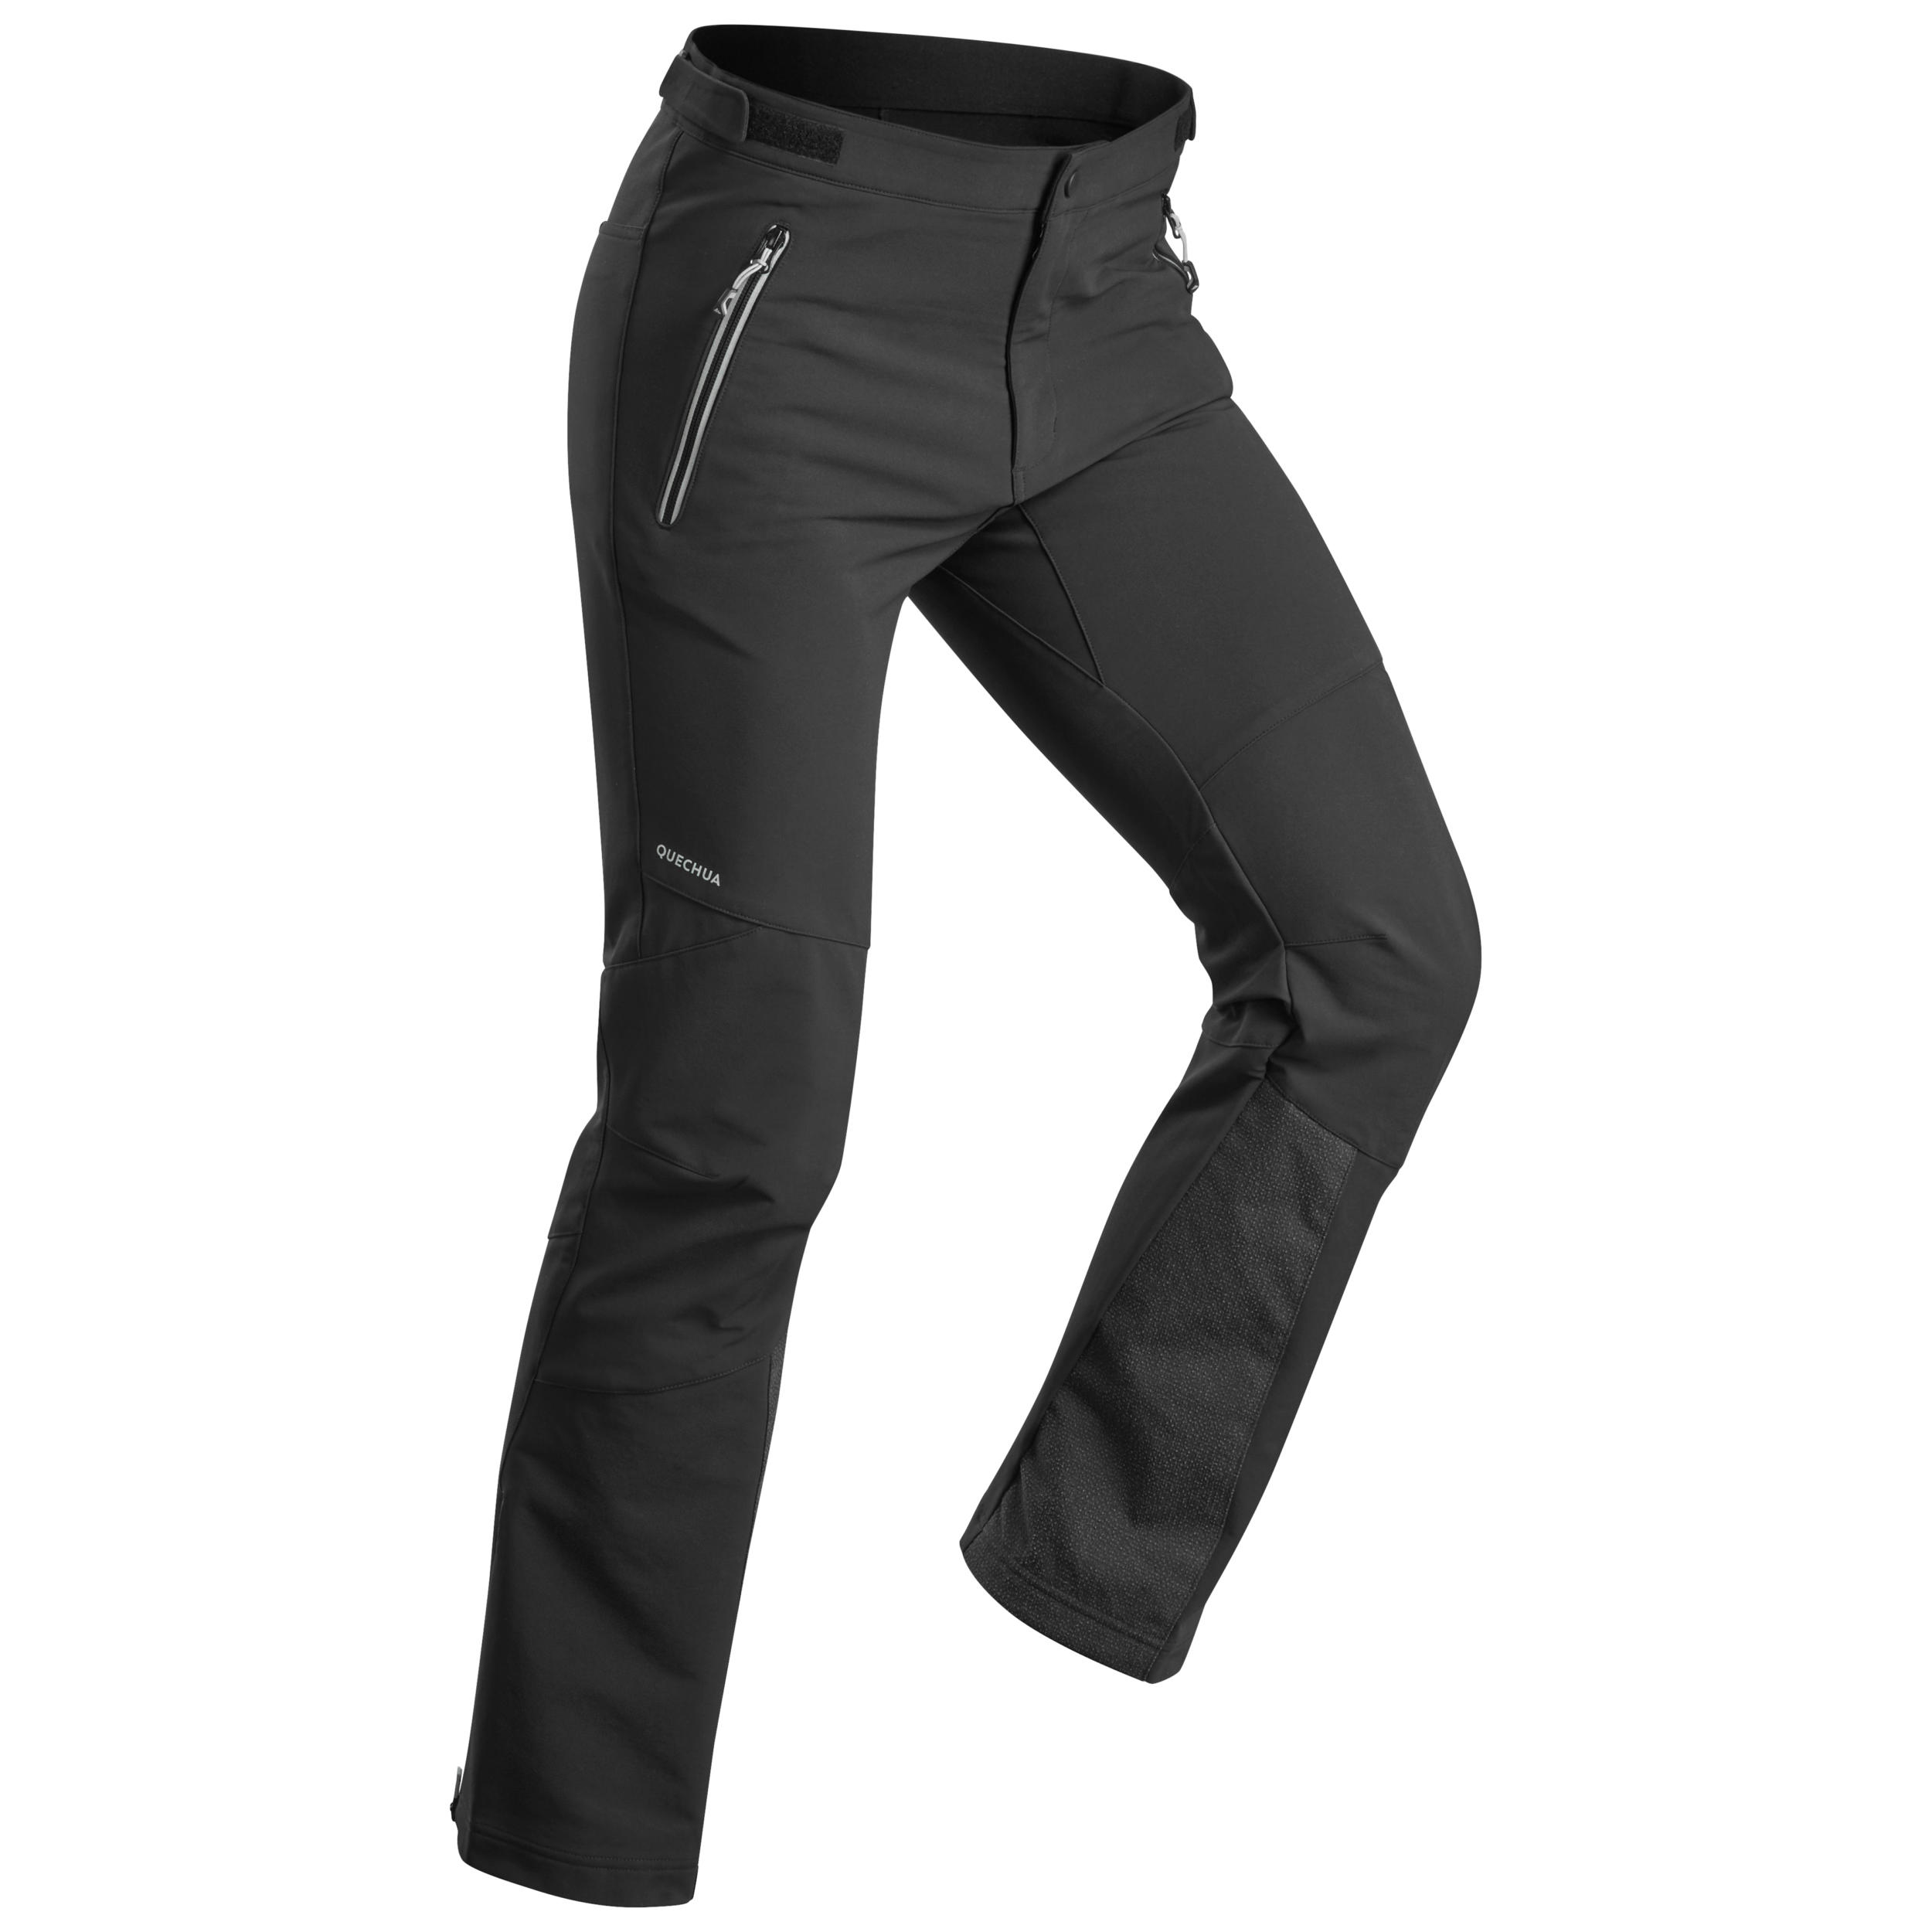 Mens Underwear THERMAL UNDERWEAR MENS THERMAL TROUSERS  Product Info   TraGate